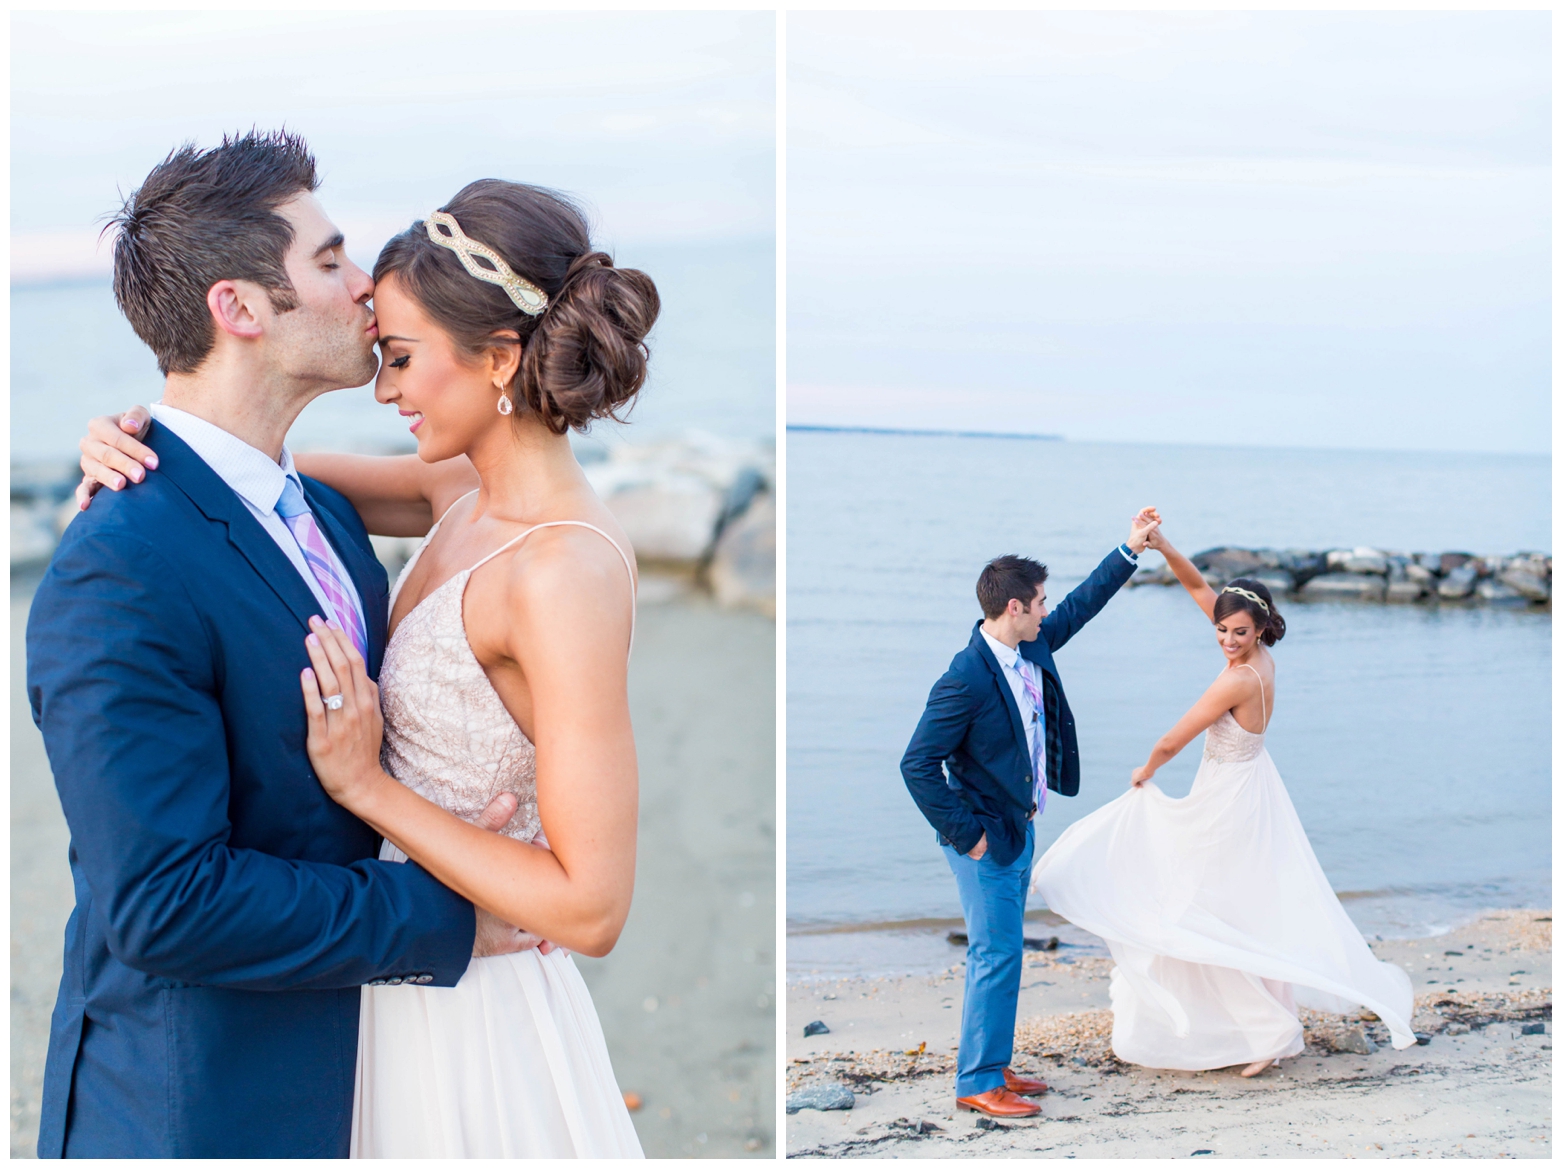 View More: http://hopetaylorphotographyphotos.pass.us/katie-and-paul-rehearsal-dinner